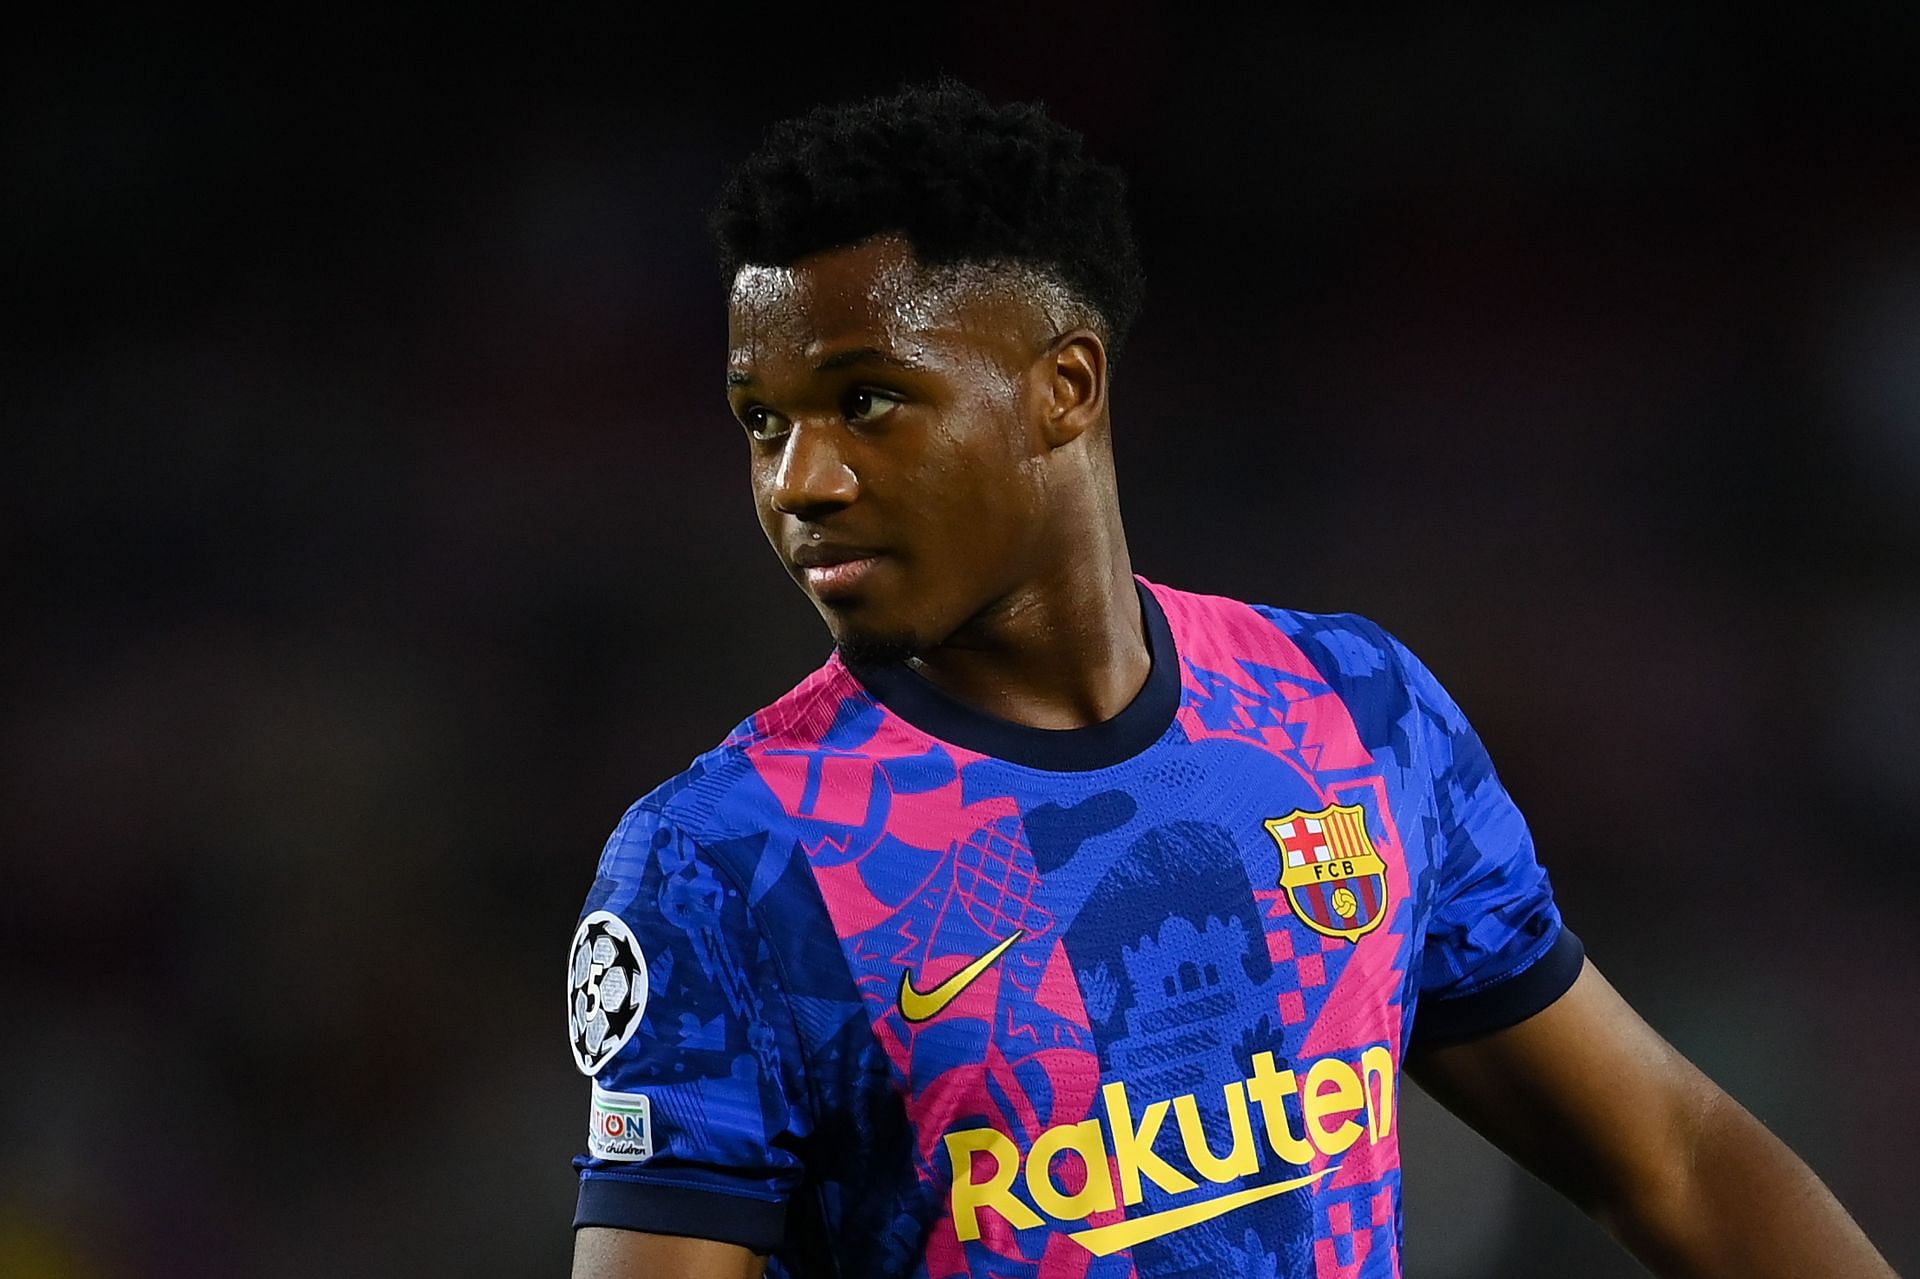 Ansu Fati has amassed just 160 minutes of playing time by Barcelona manager Ronald Koeman so far